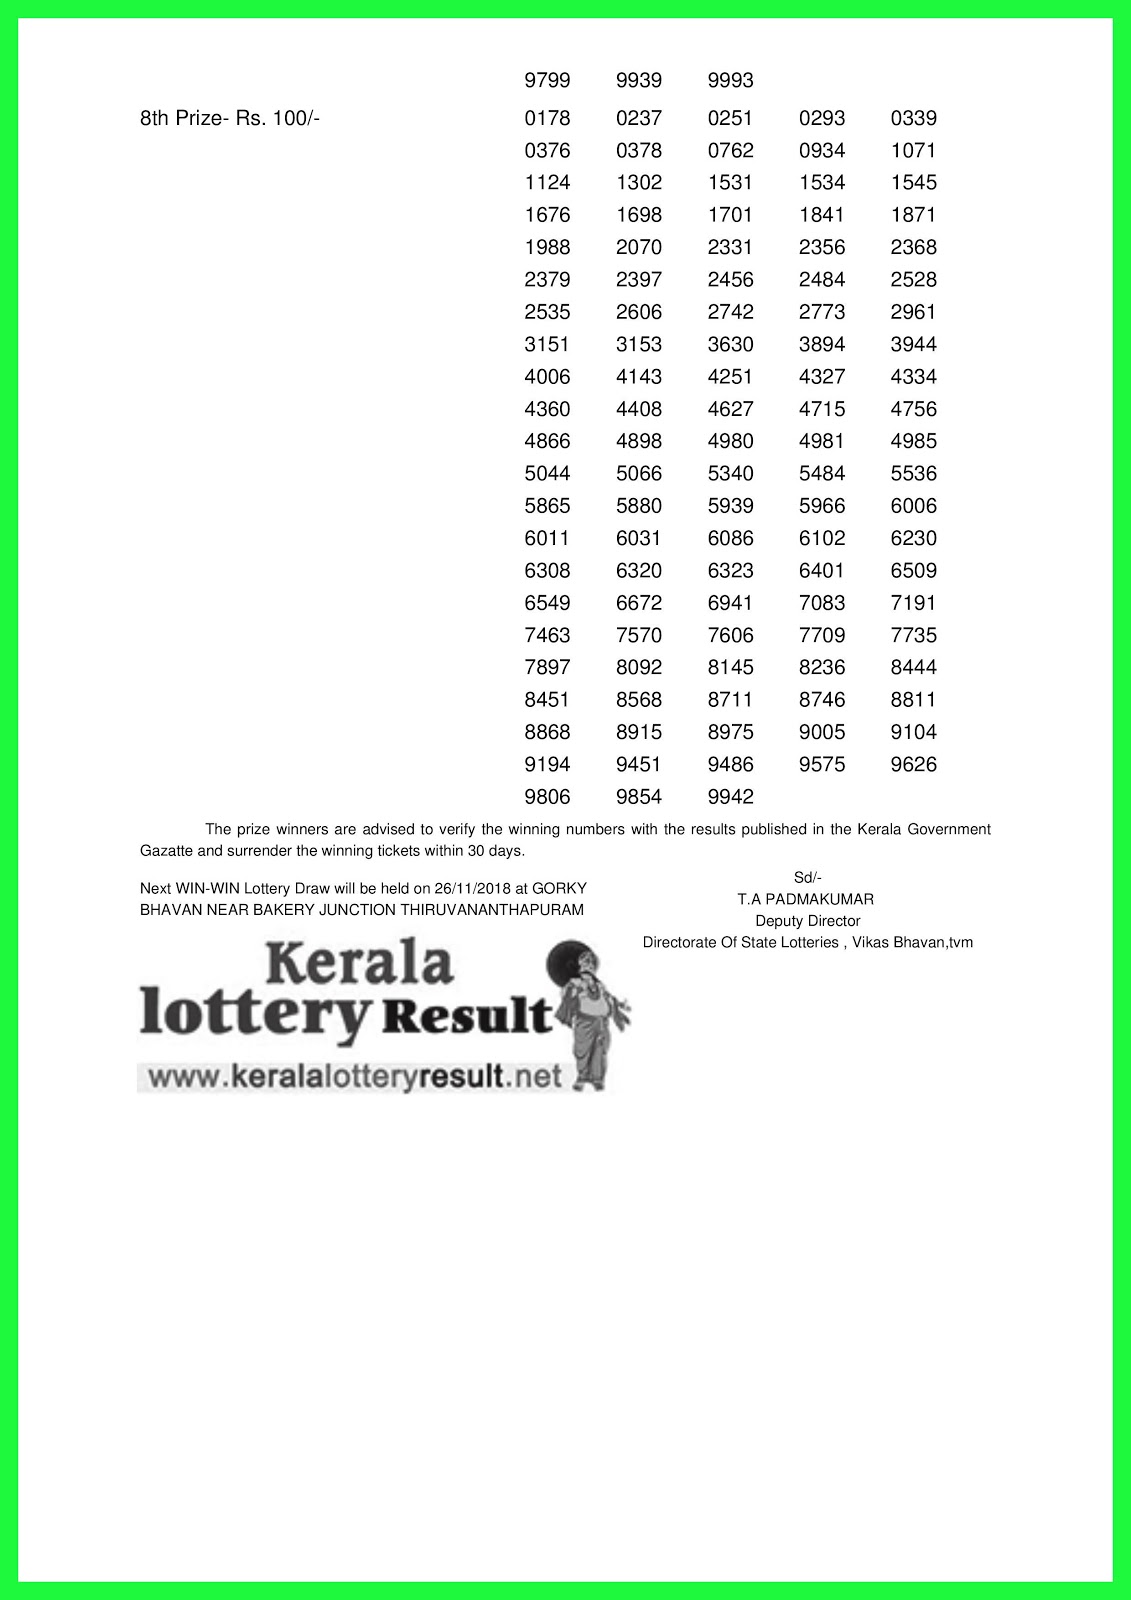 Kerala Lottery Results 2018: WIN WIN W 487 Lottery Draw Results announced  at keralalotteries.com